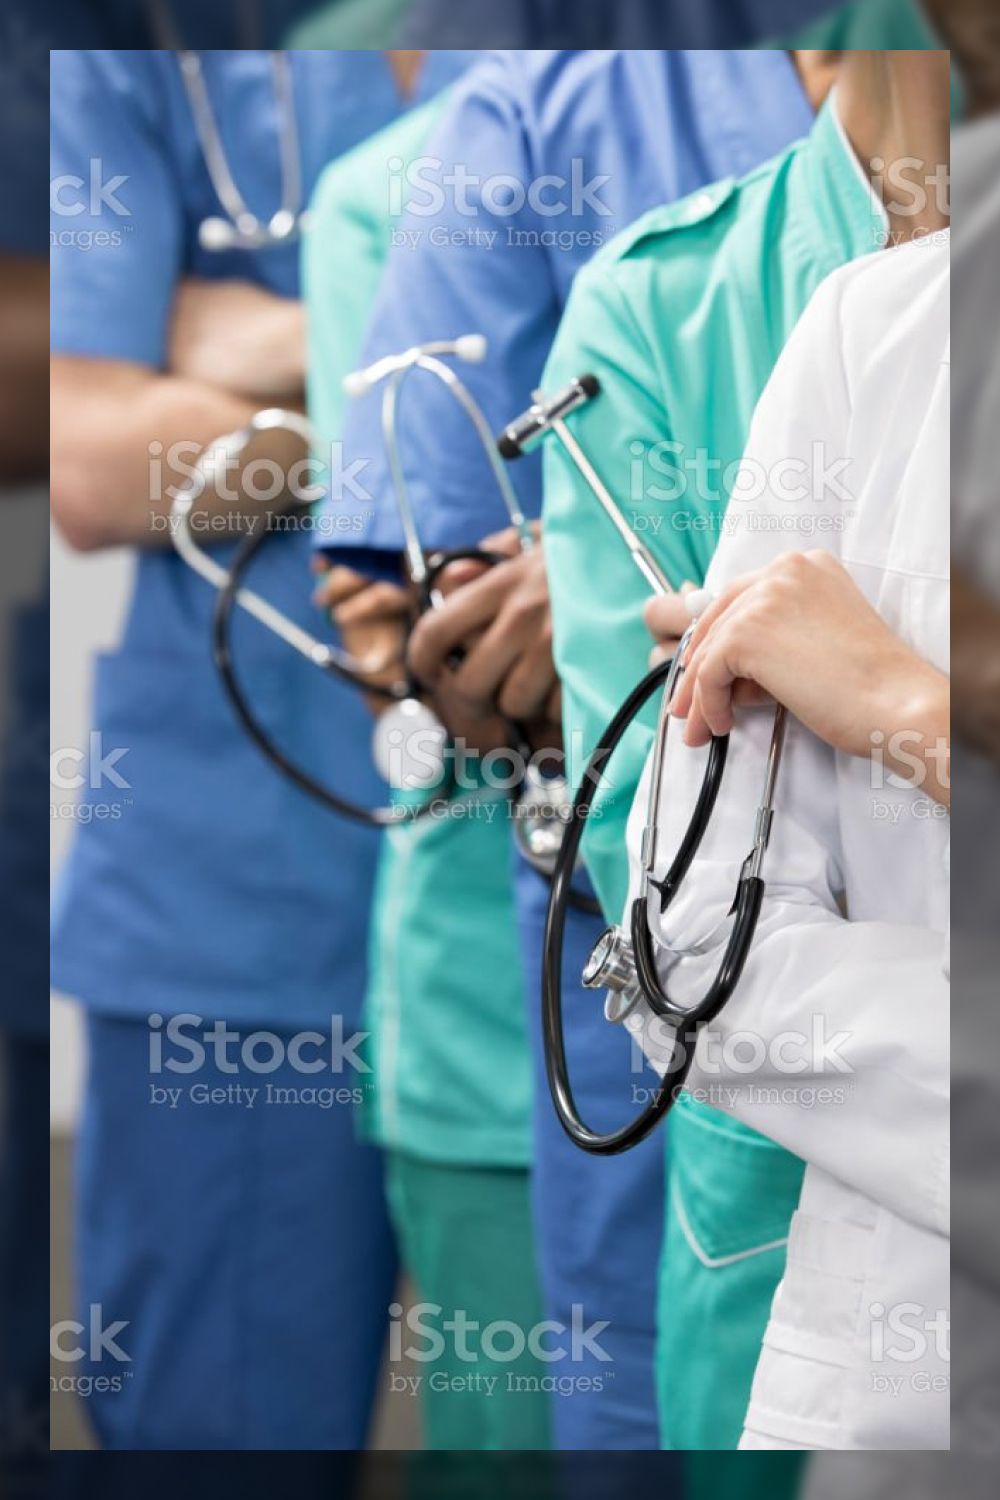 Partial view of group of medical workers with equipment in laboratory stock photo.